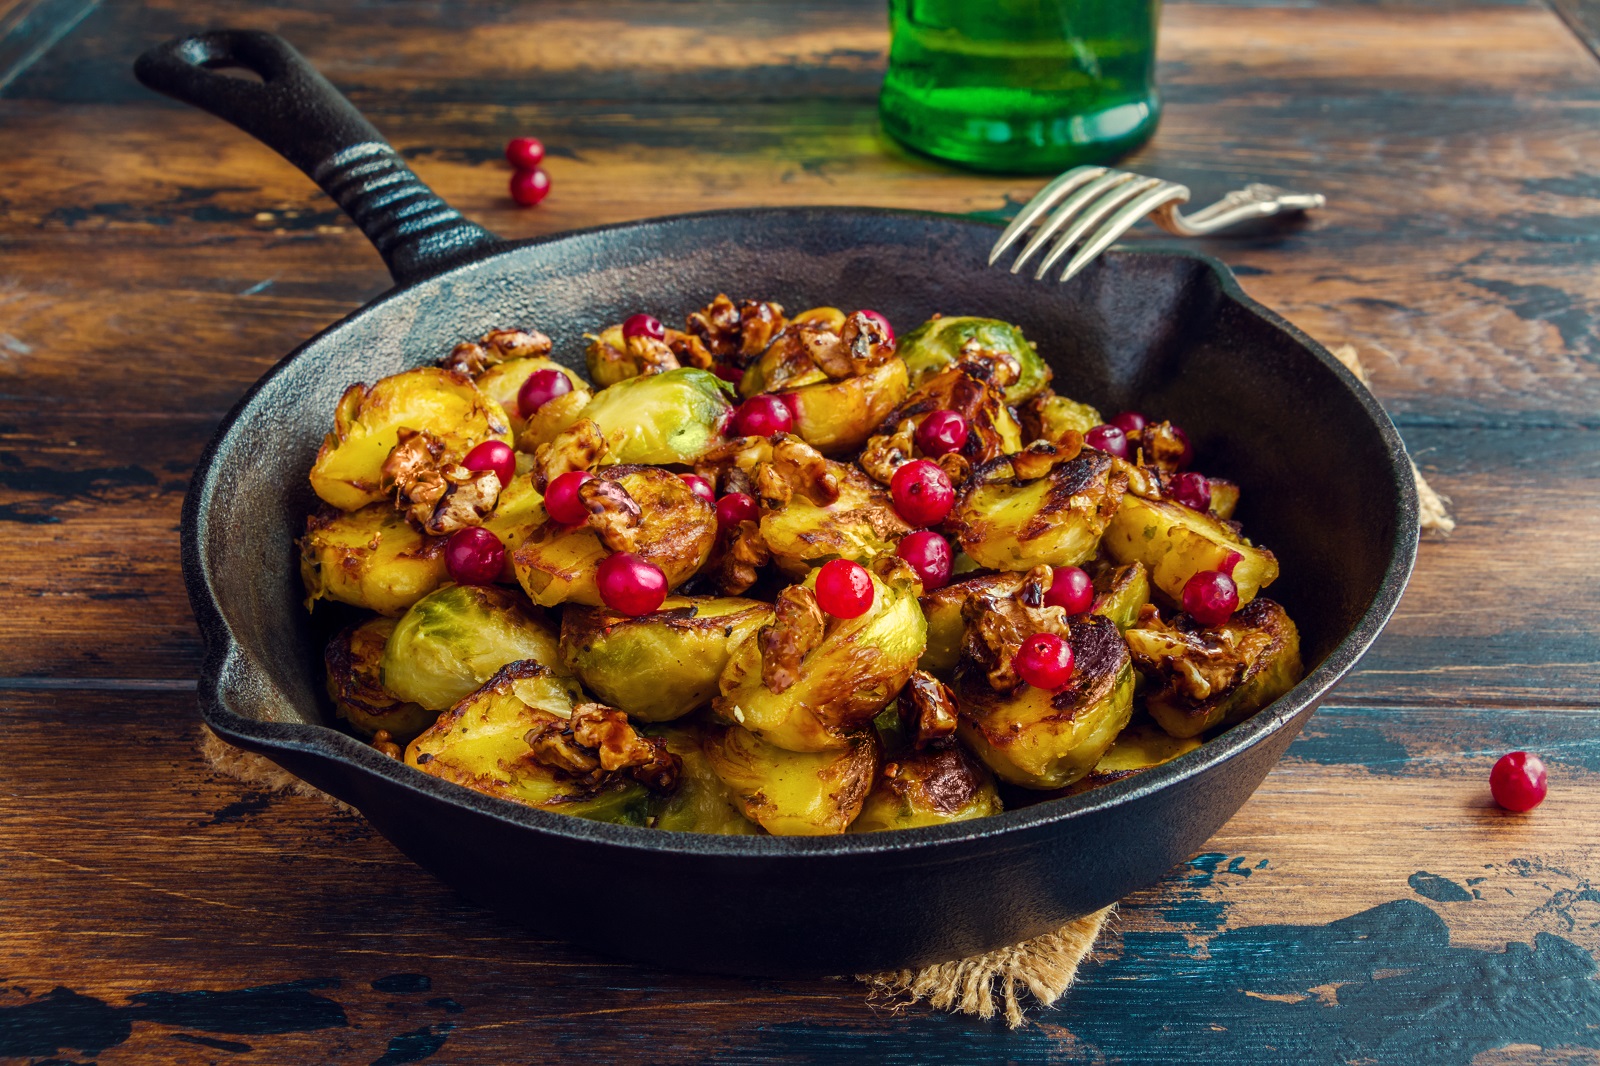 Roasted Brussels sprouts with caramelized walnuts and cranberries in a cast iron frying pan on a wooden table.